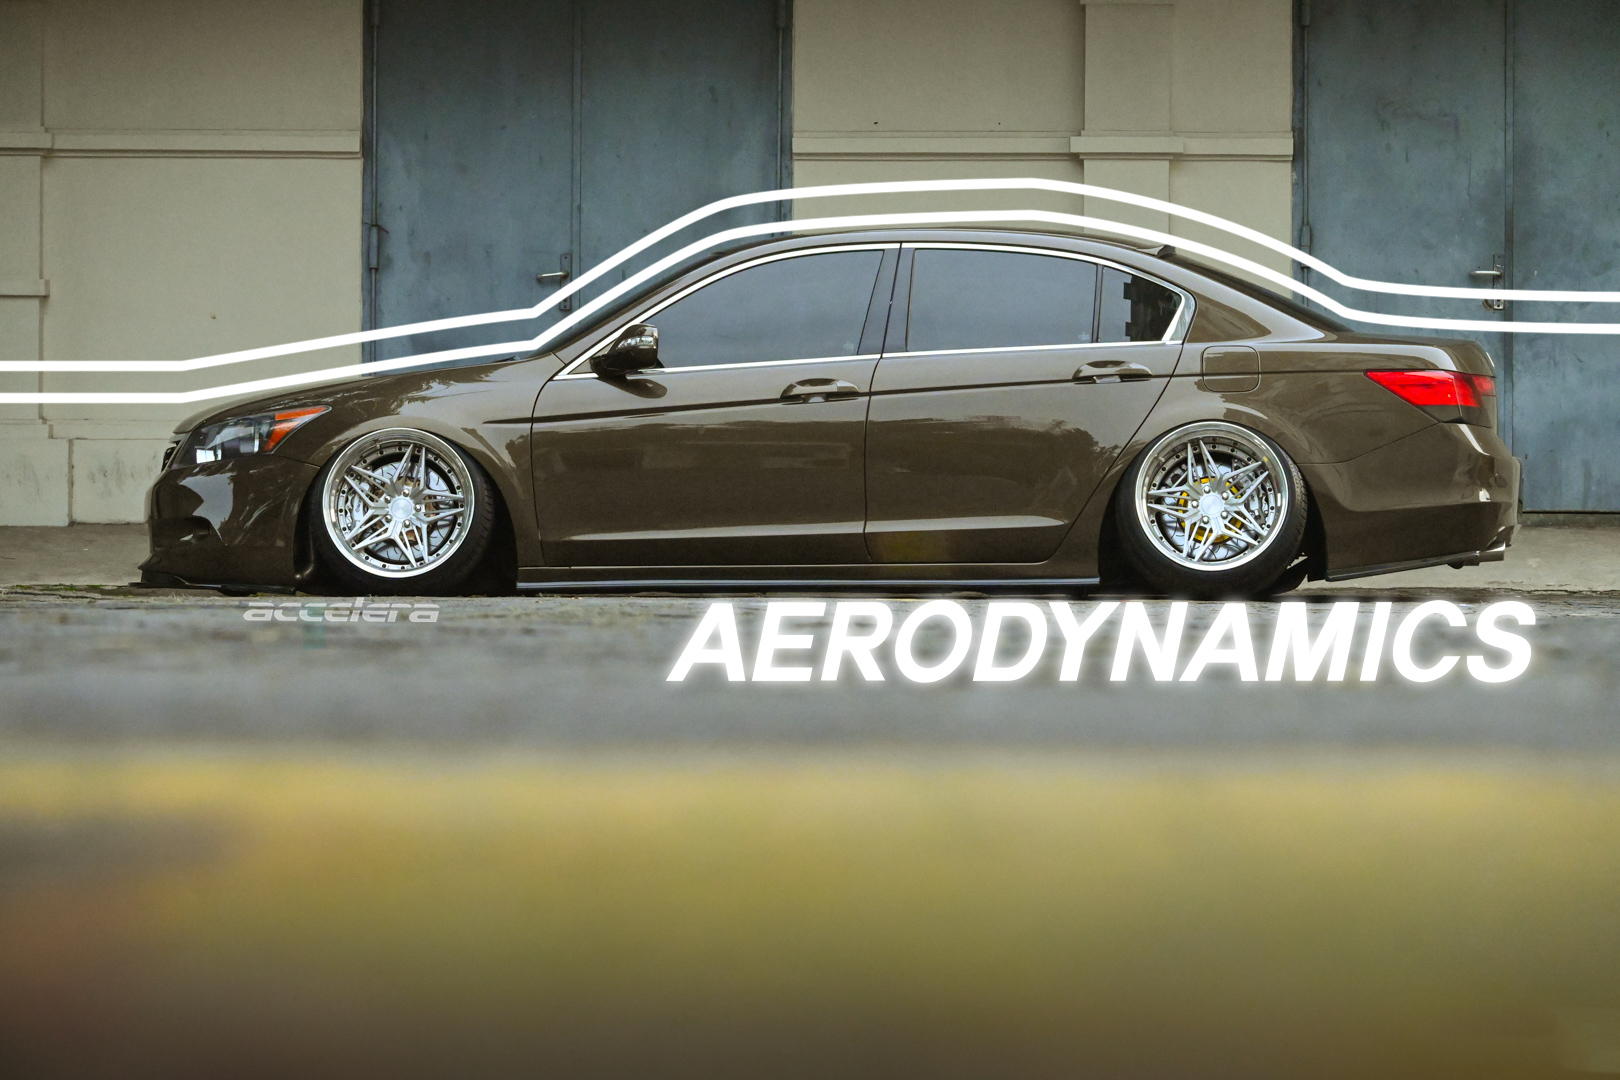 Aerodynamics And Fuel Economy Are Related